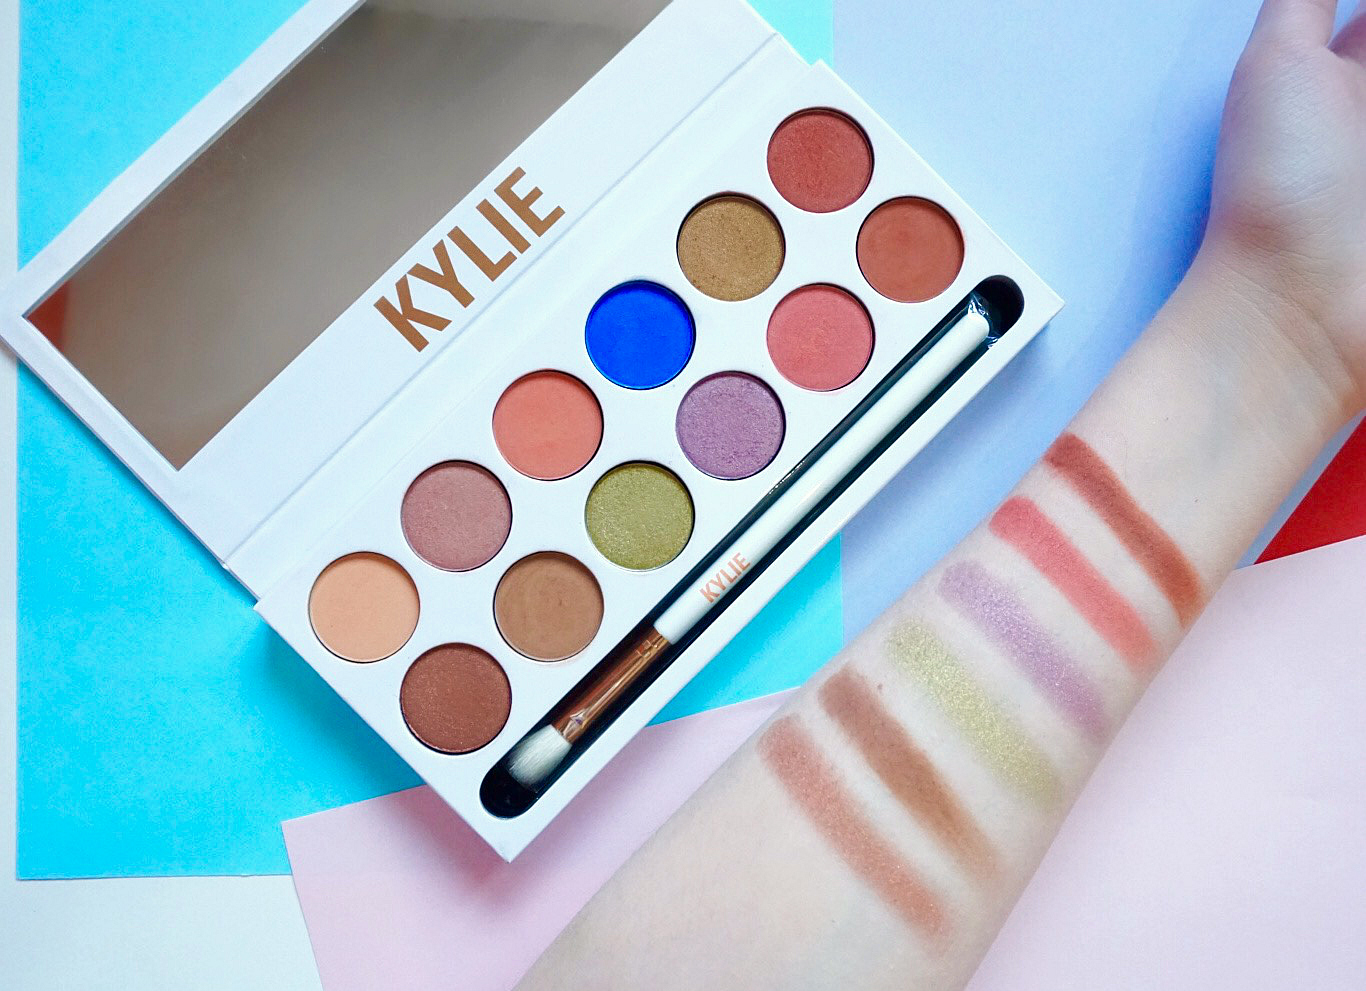 Kylie Cosmetics Royal Peach Palette Swatches